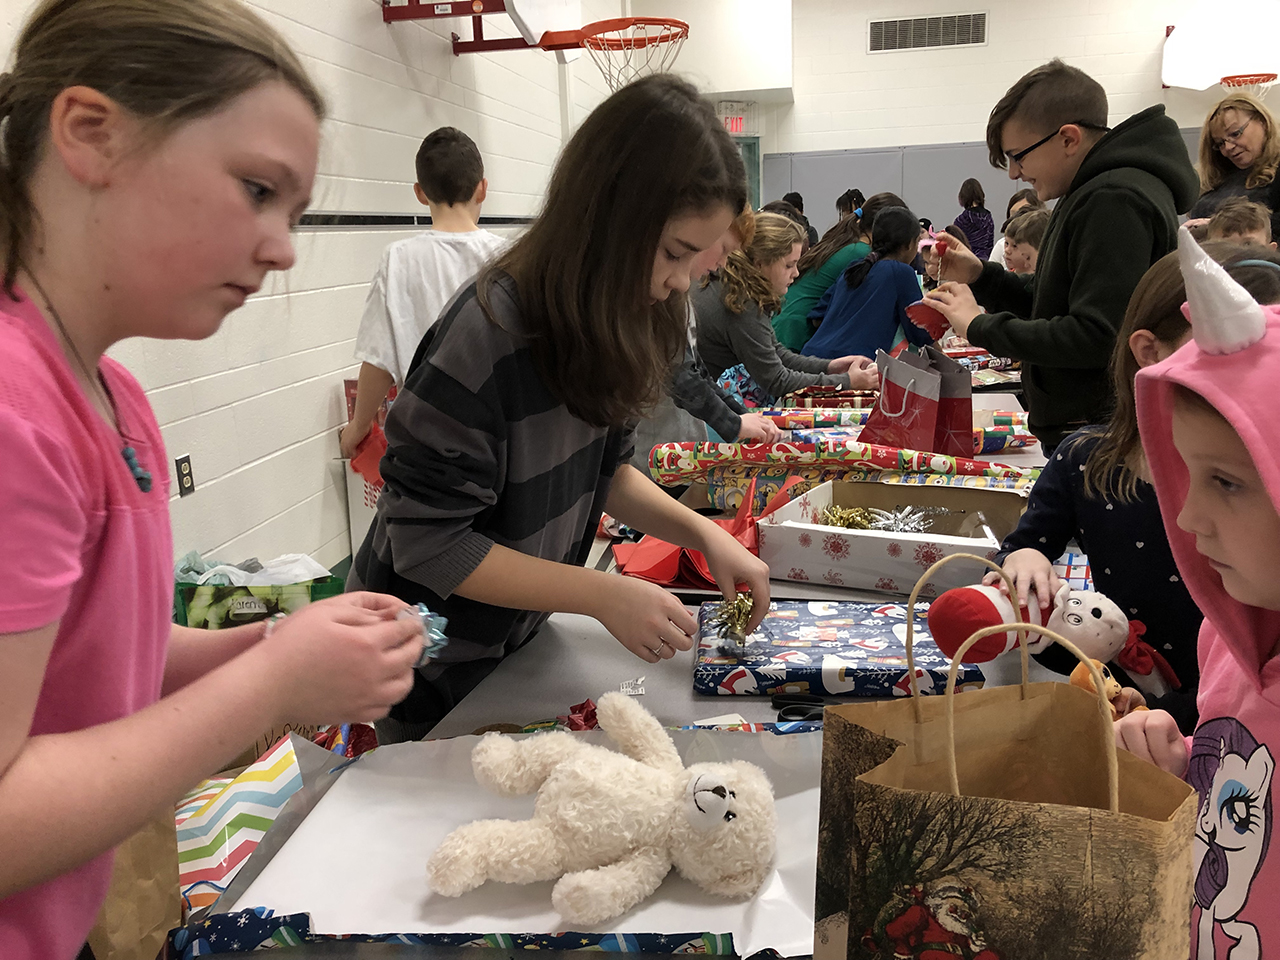 Students at Brigadoon Public School wrapping gifts purchased at their seasonal celebration.